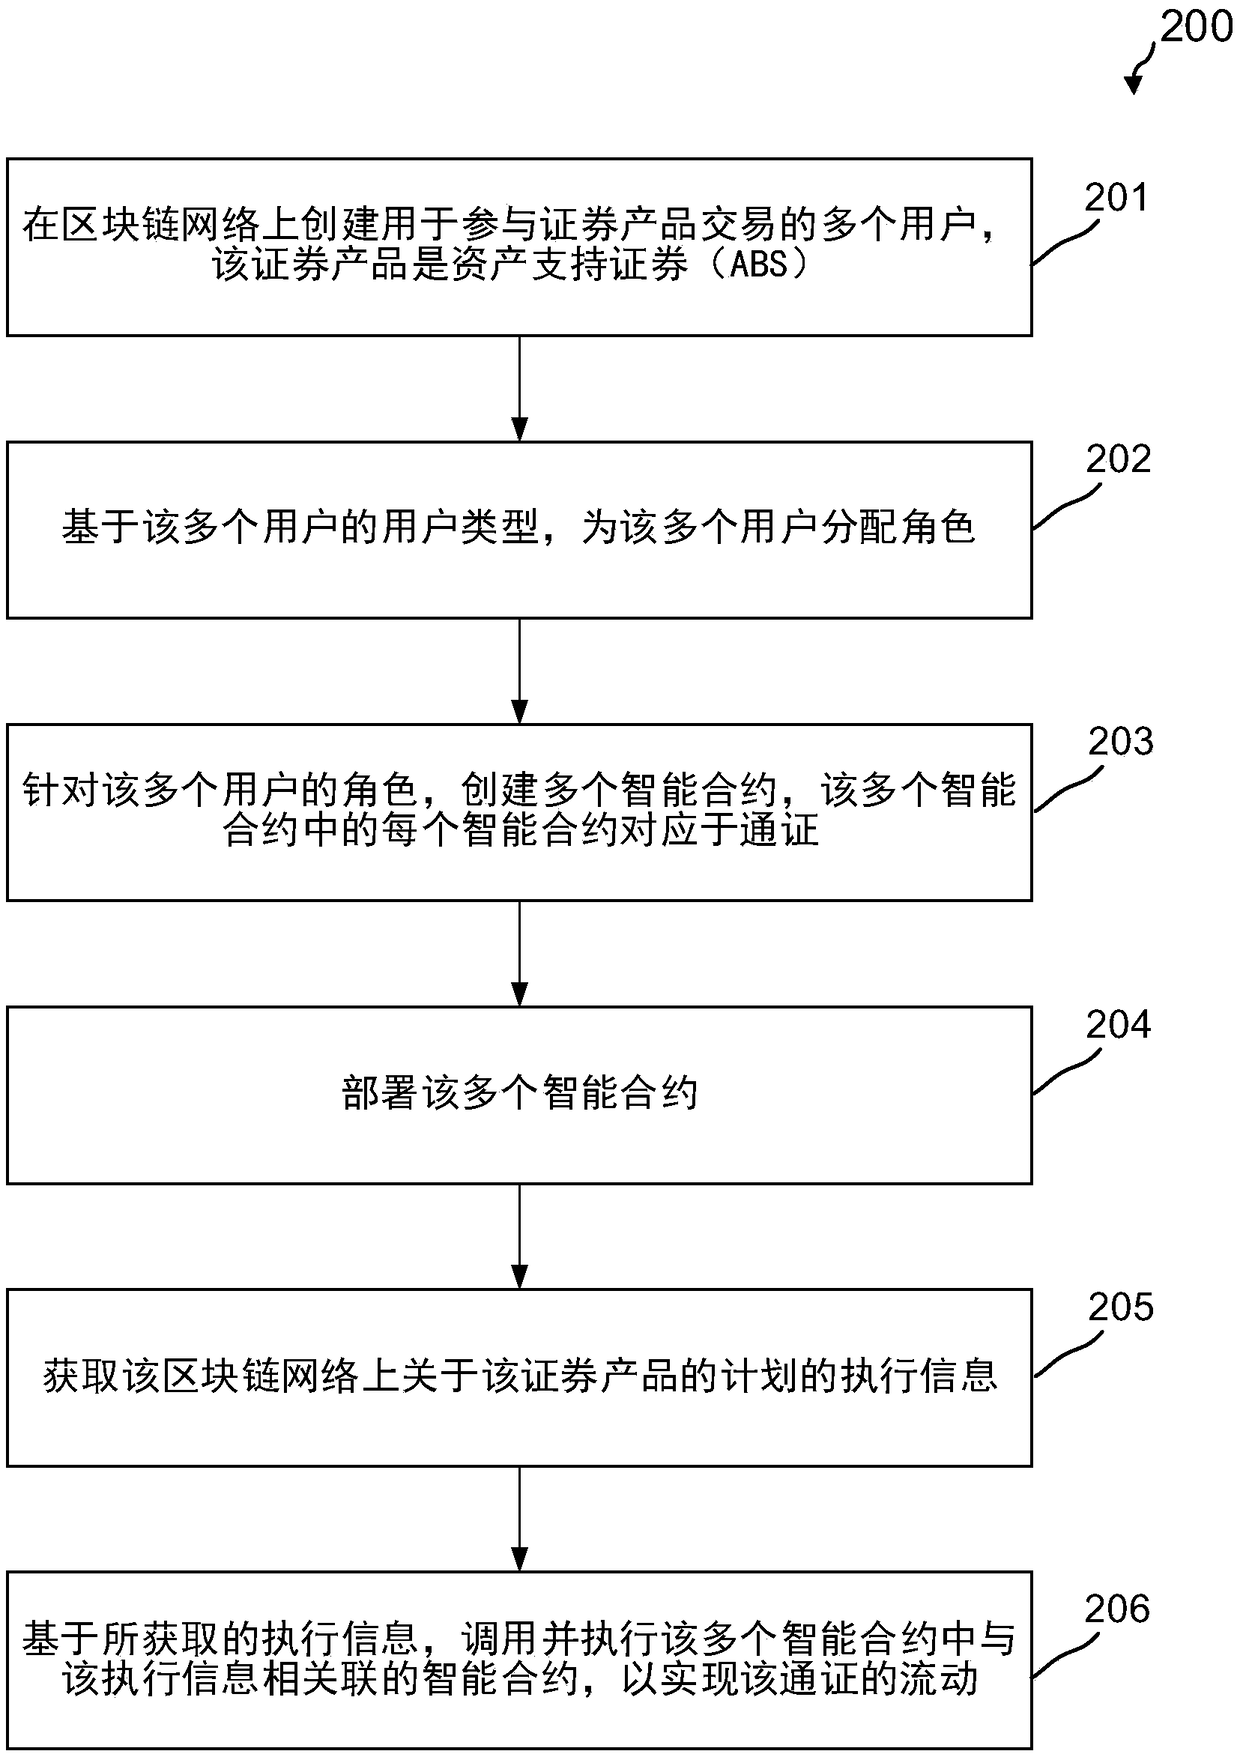 Securities product processing method and device for asset generalization based on block chain